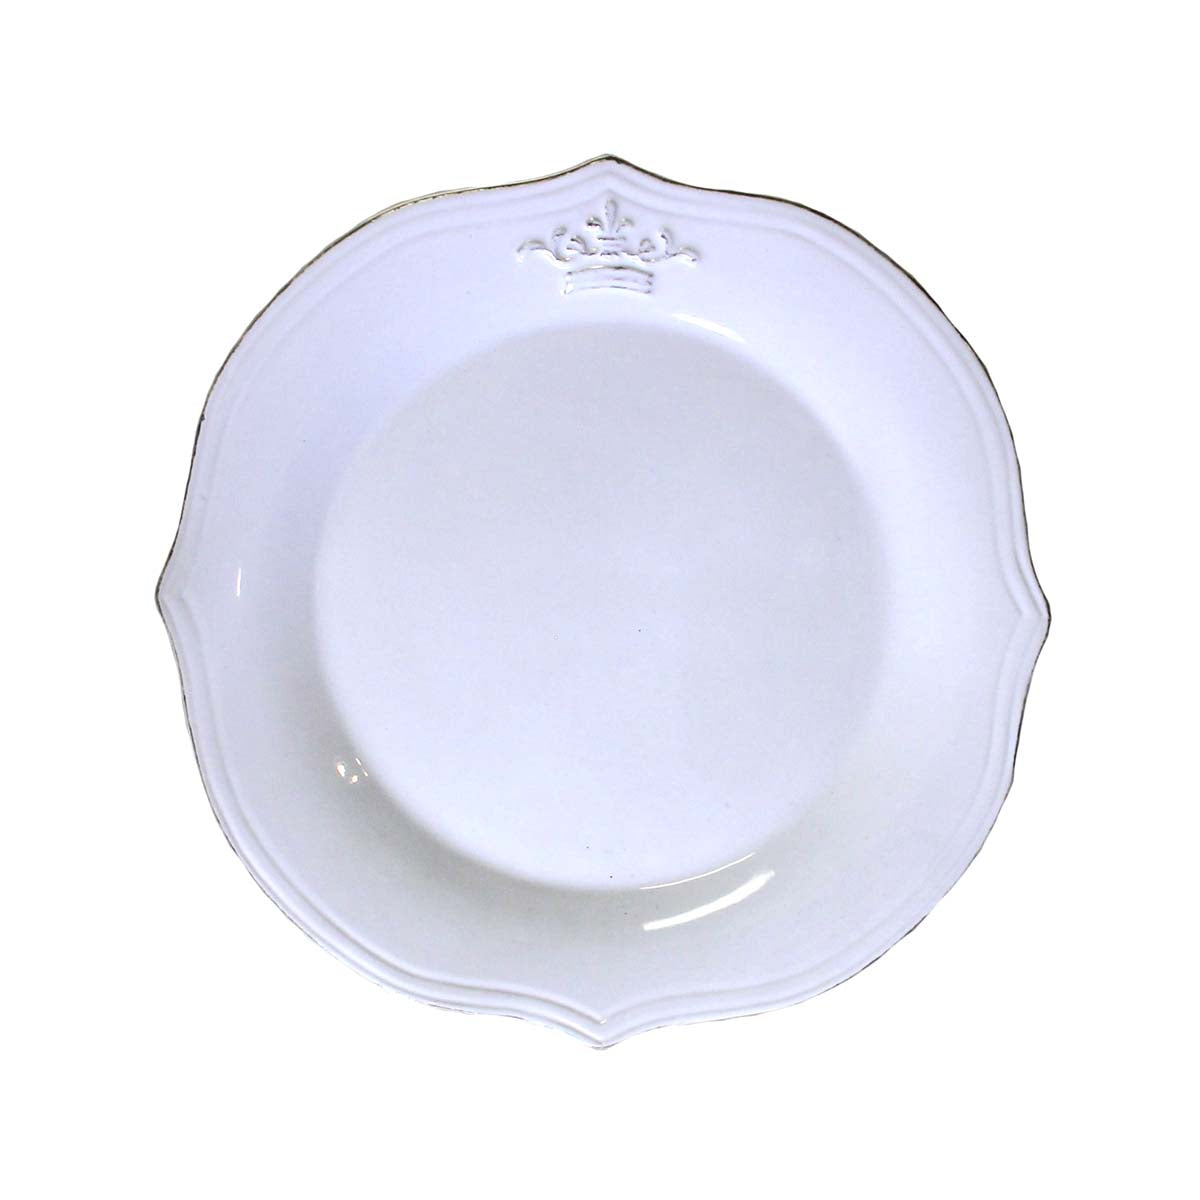 The Royal Standard Crown Bread Plate